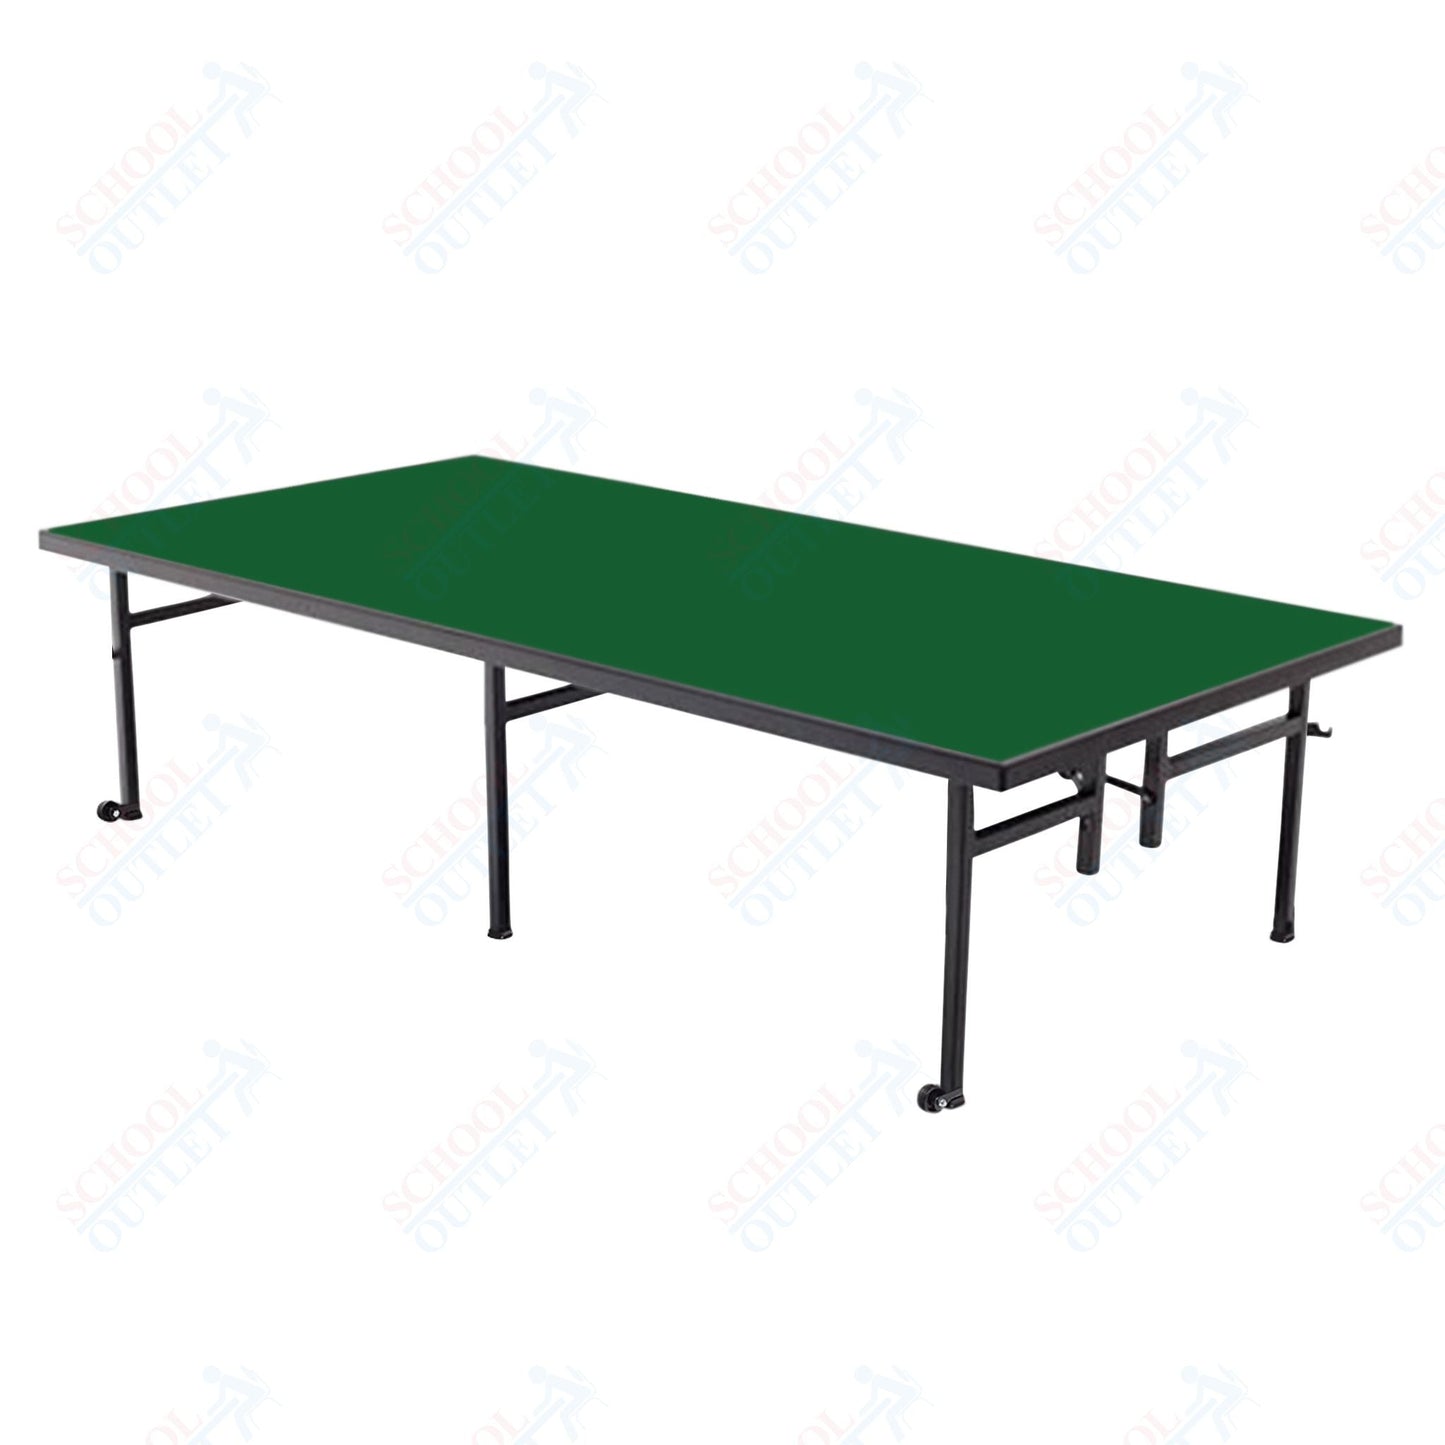 AmTab Fixed Height Stage - Carpet Top - 48"W x 96"L x 16"H (AmTab AMT - ST4816C) - SchoolOutlet